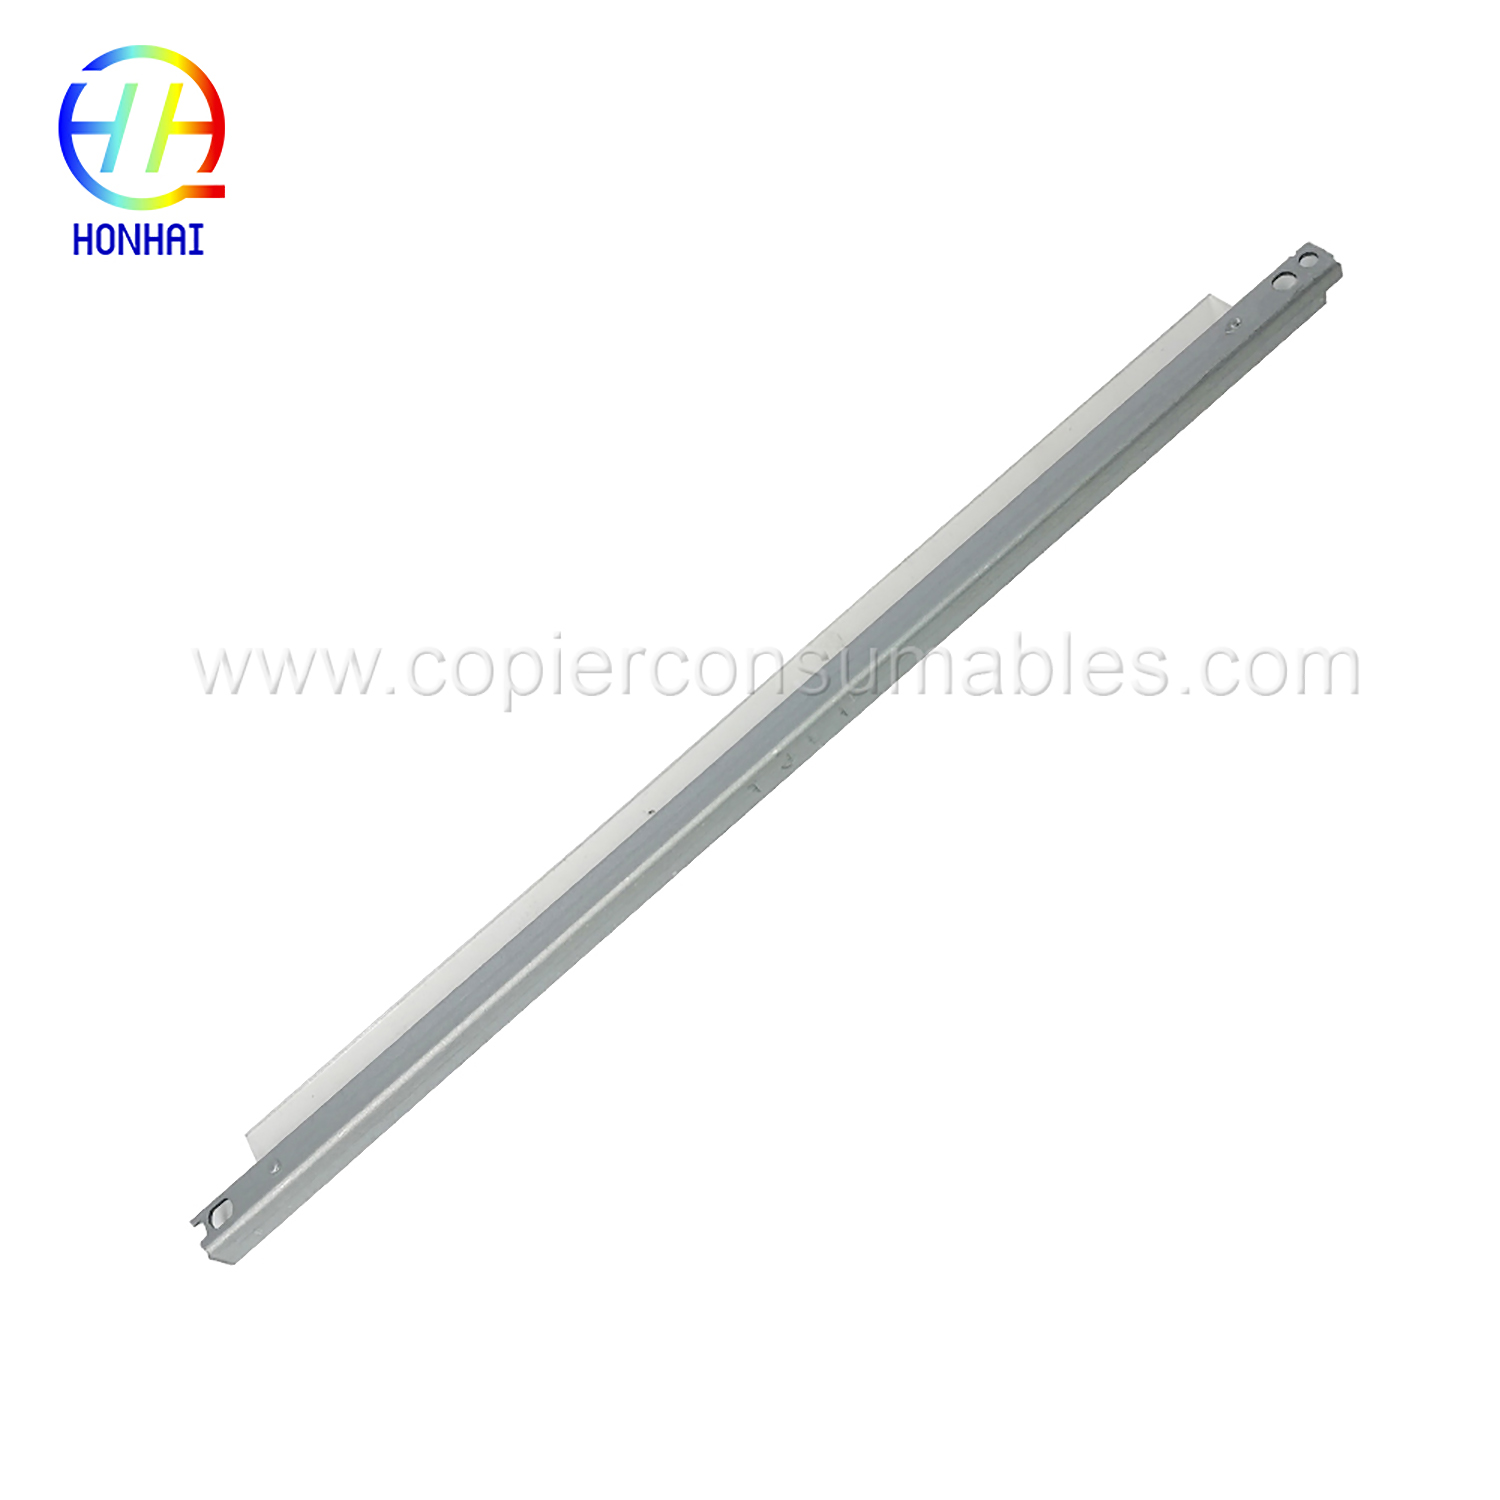 Drum cleaning blade for HP HP88A P1007 1008 1106 1108 M1136 1213 1216 1218 P1005 1006 (2) 拷贝